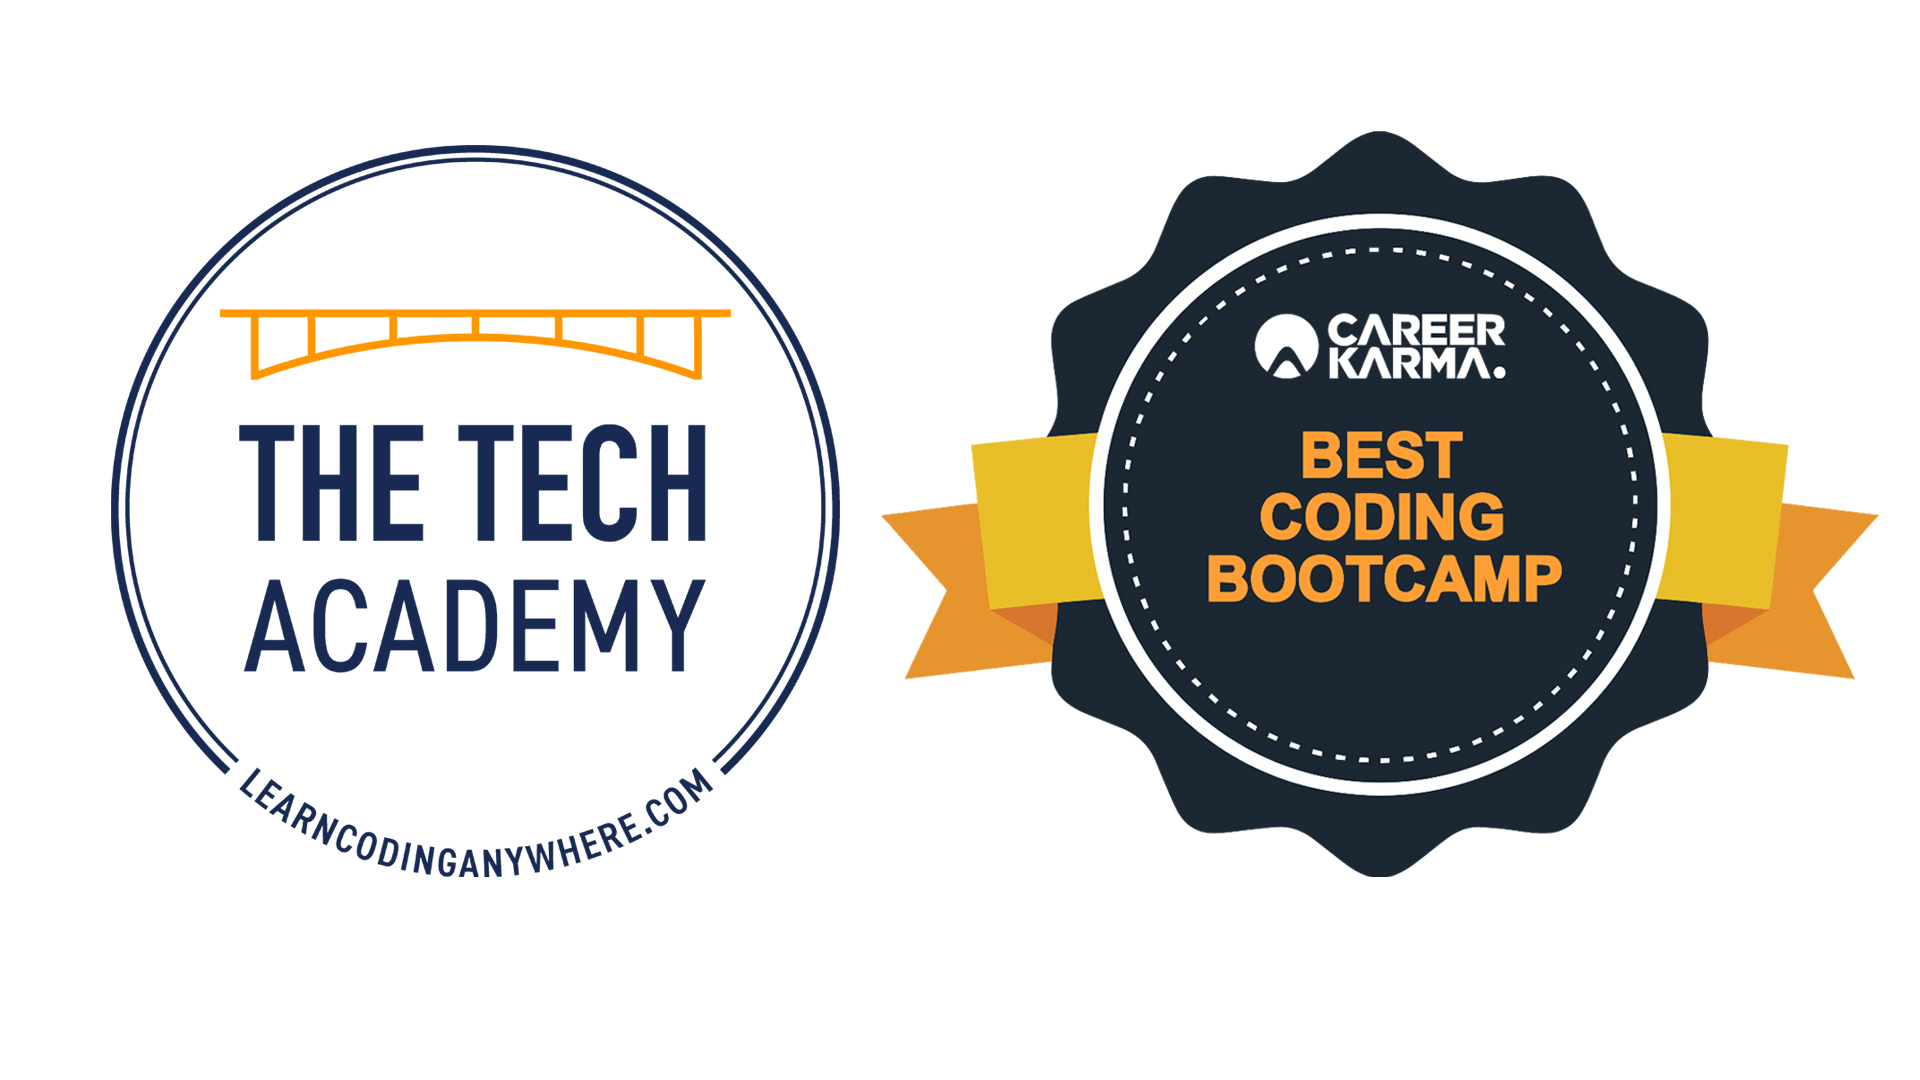 The Tech Academy Awarded as the Best Coding Boot Camp by Career Karma